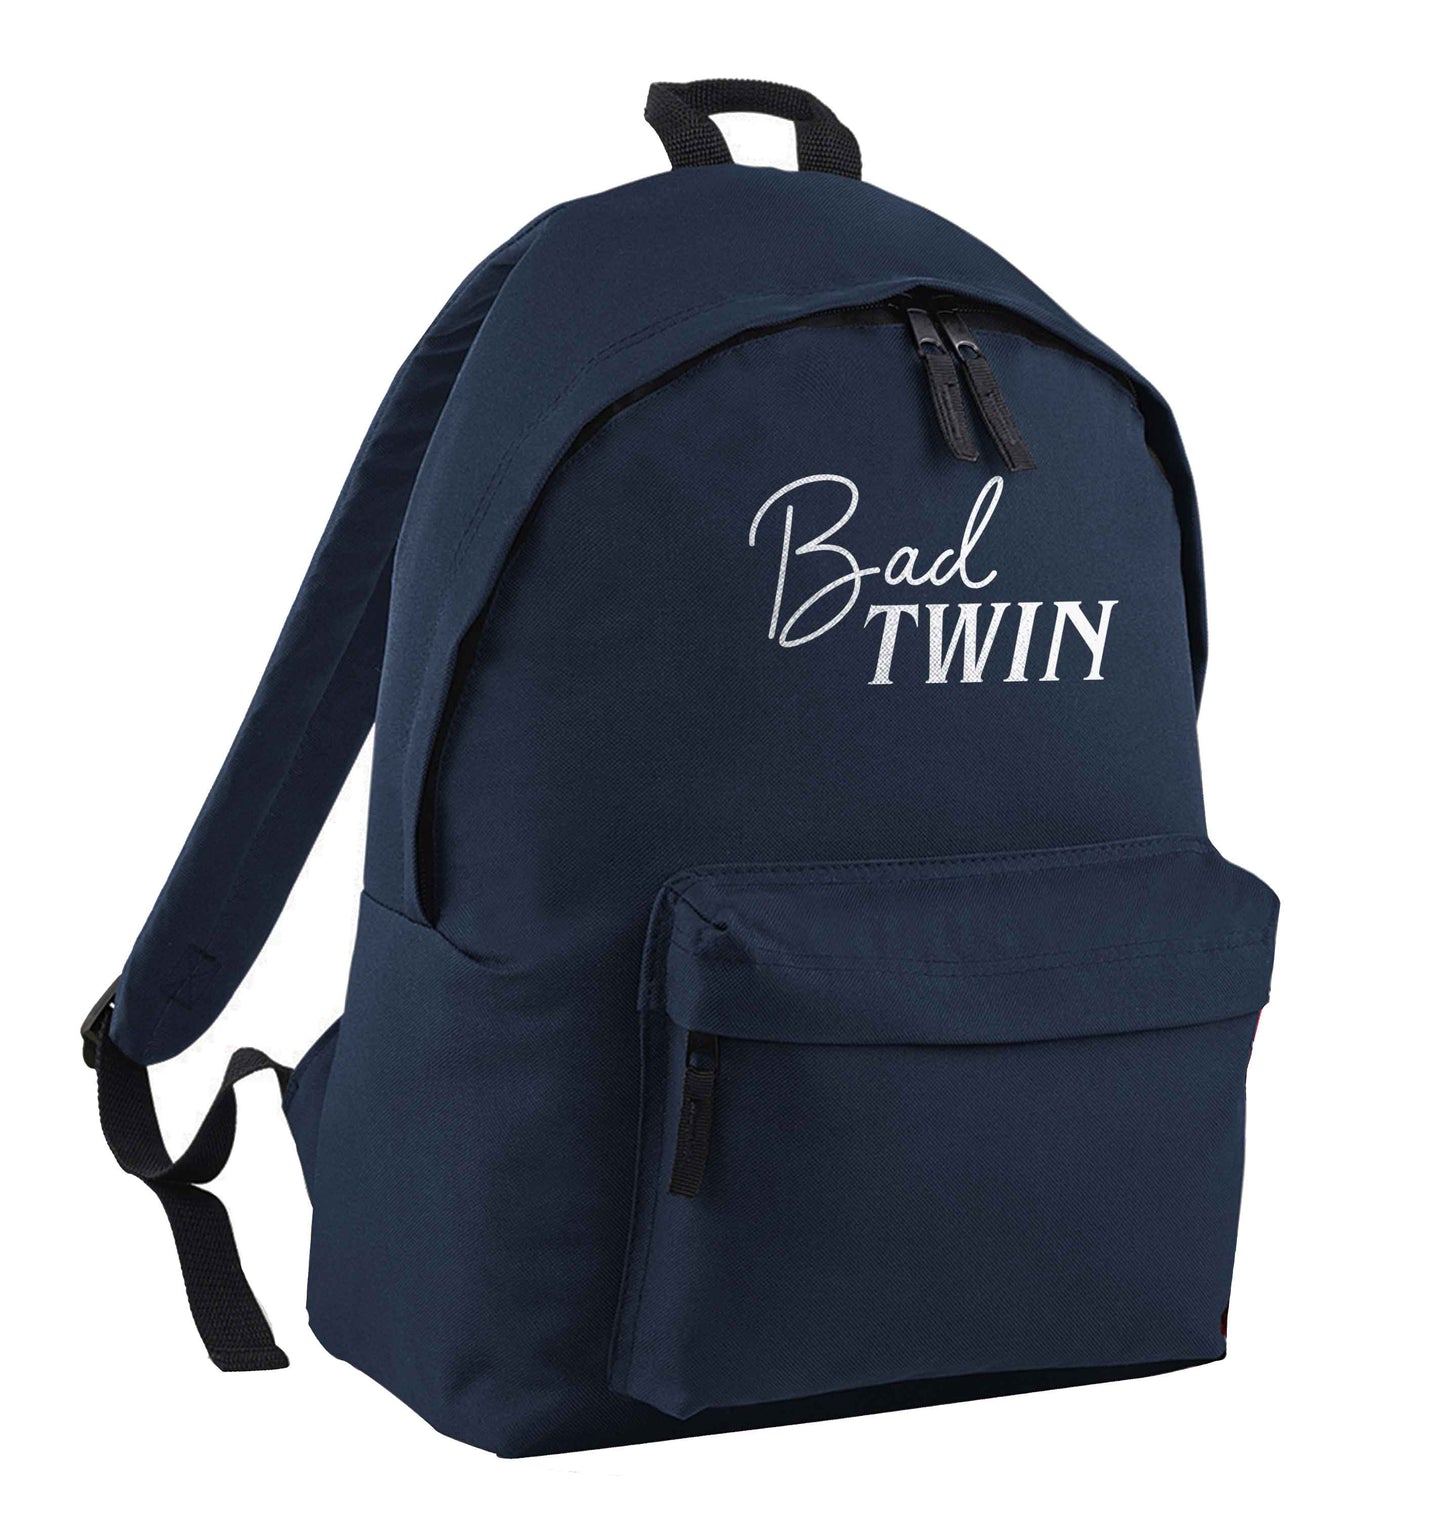 Bad twin navy adults backpack